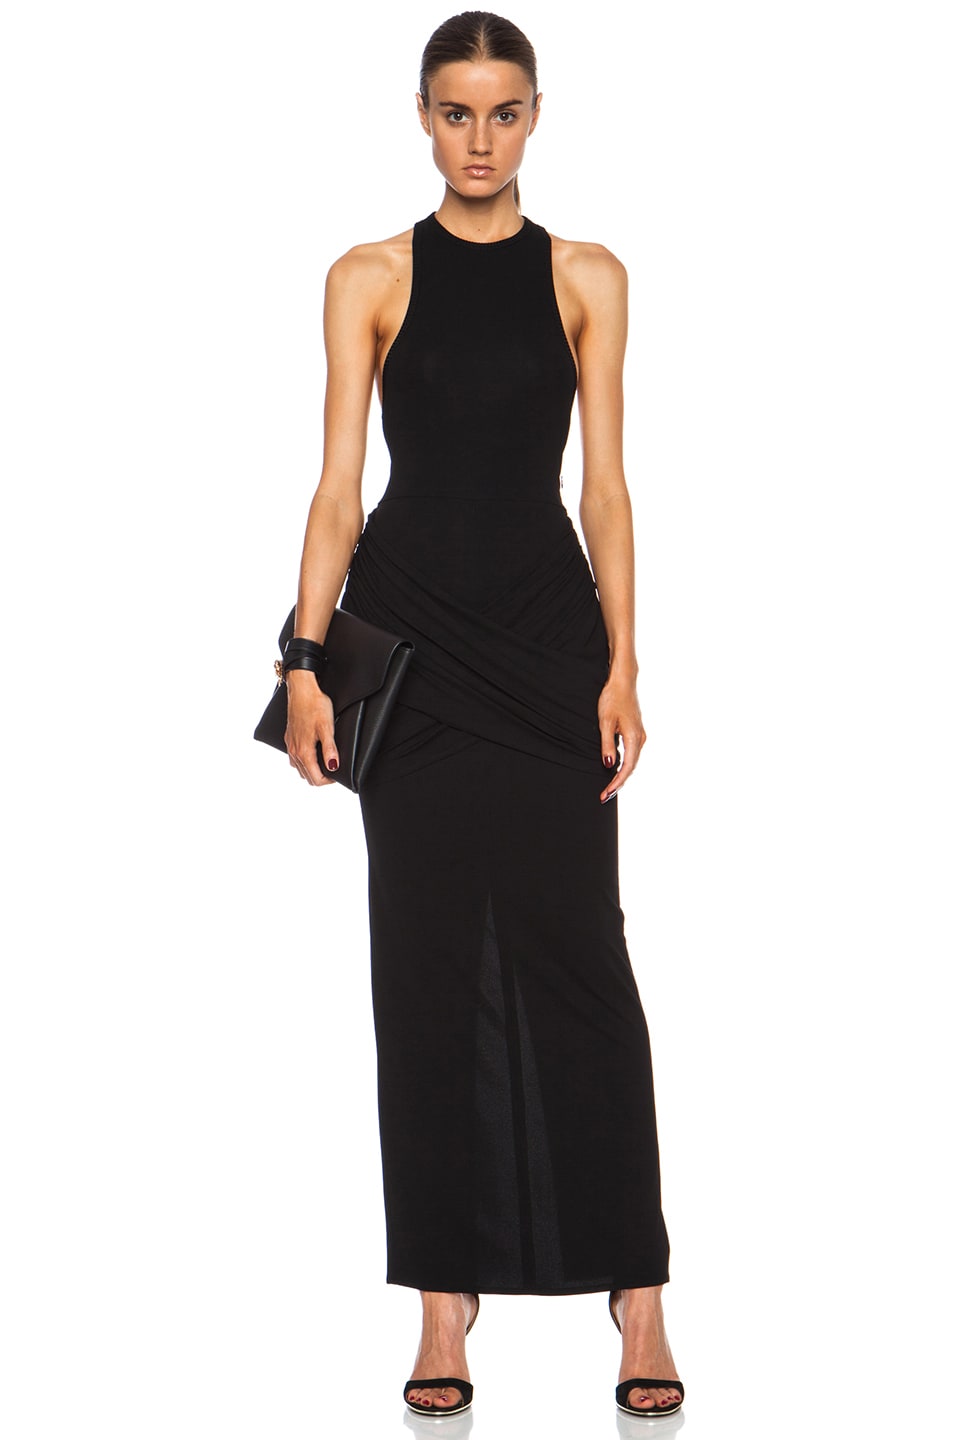 Givenchy Draped Jersey Viscose-Blend Dress in Black | FWRD